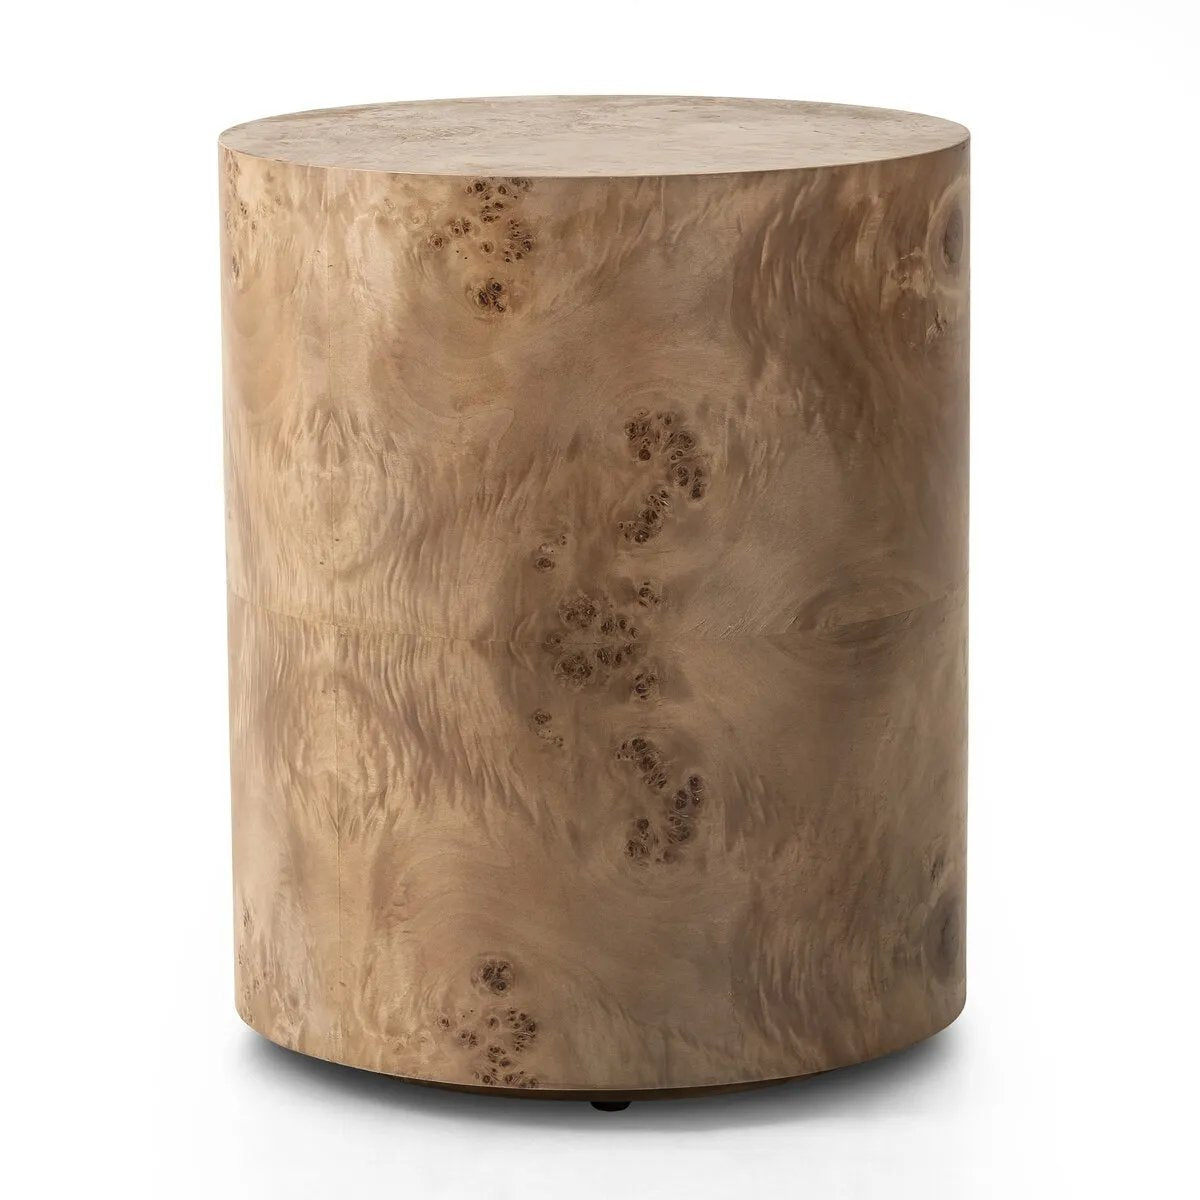 A simple drum shape showcases the natural artistry of the richly grained caramel burl veneer. Its compact size is ideal for smaller spaces.Collection: Hughe Amethyst Home provides interior design, new home construction design consulting, vintage area rugs, and lighting in the Miami metro area.